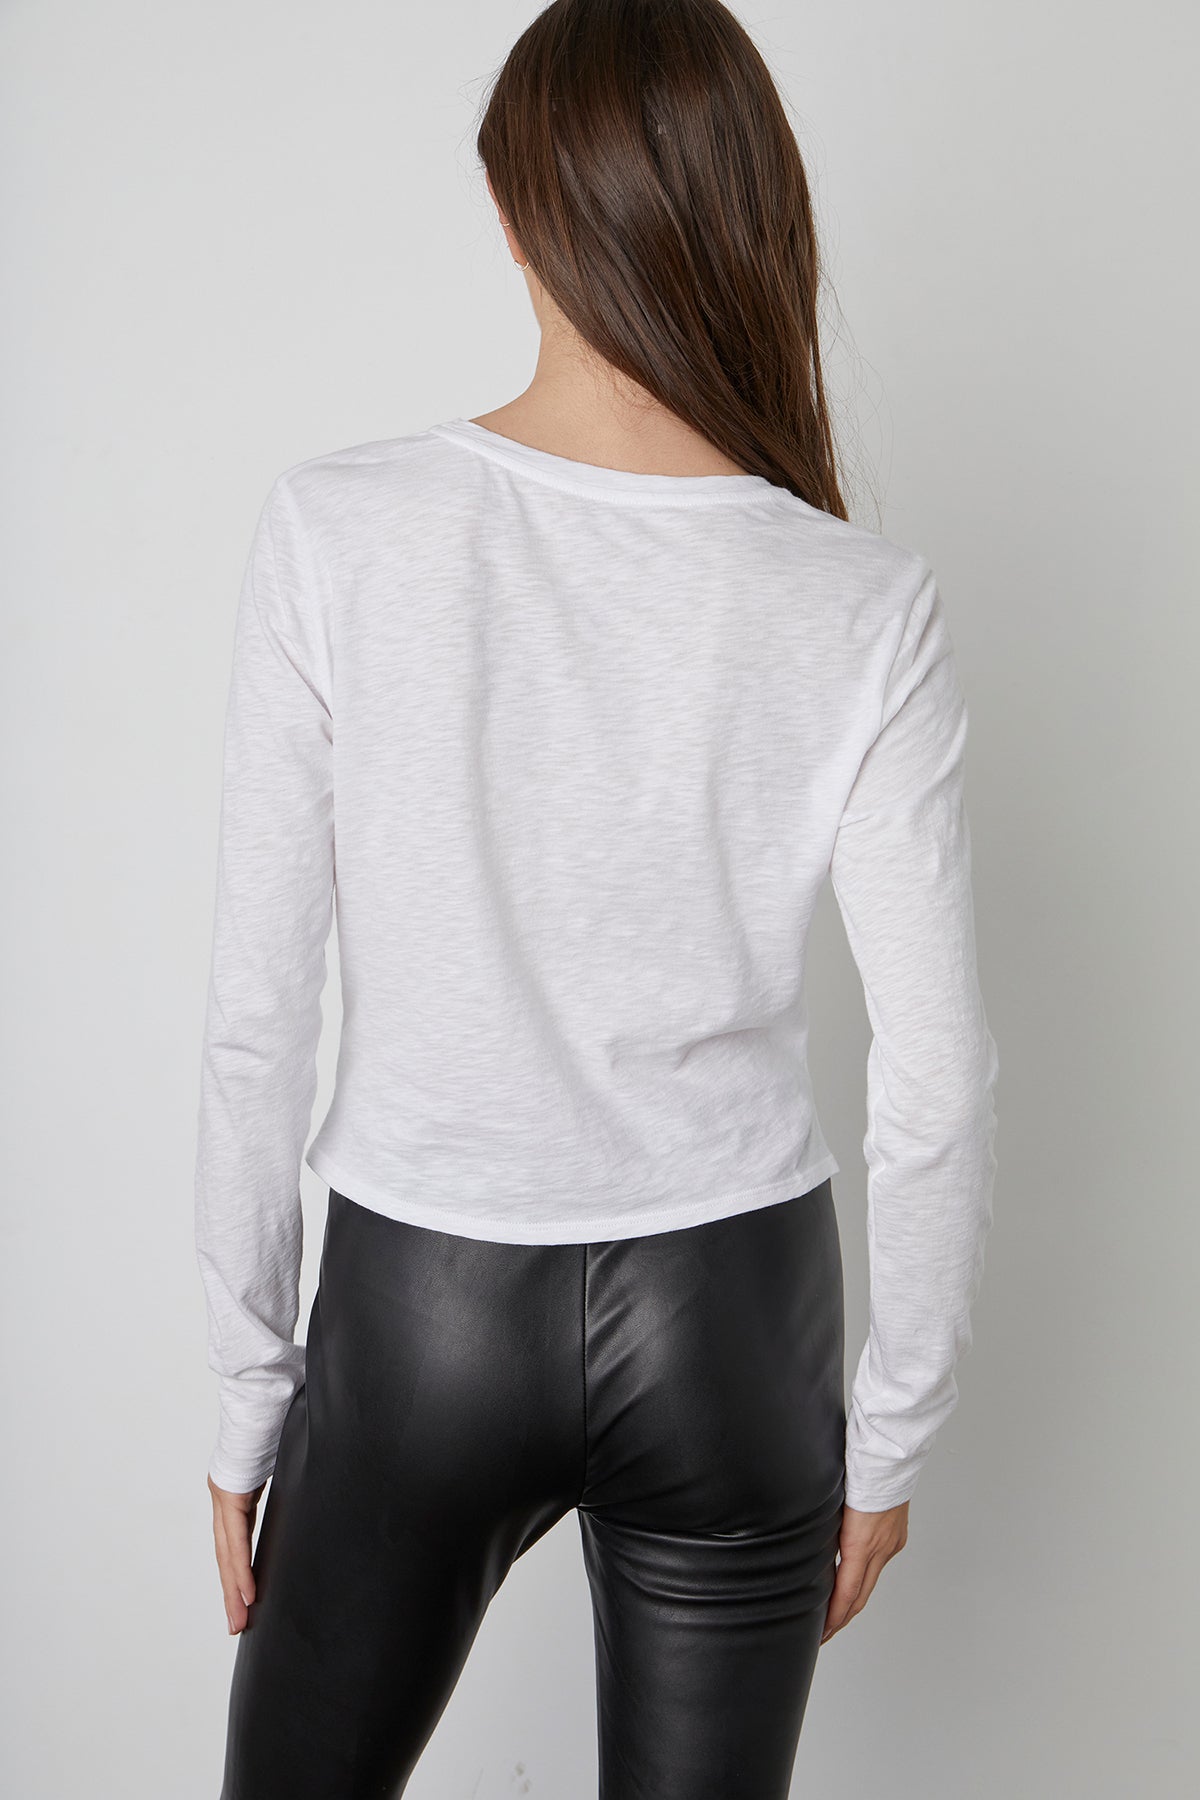 The back view of a feminine woman wearing leather leggings and a BEATRICE FRONT TWIST TEE by Velvet by Graham & Spencer that accentuates her waist.-23119086551233